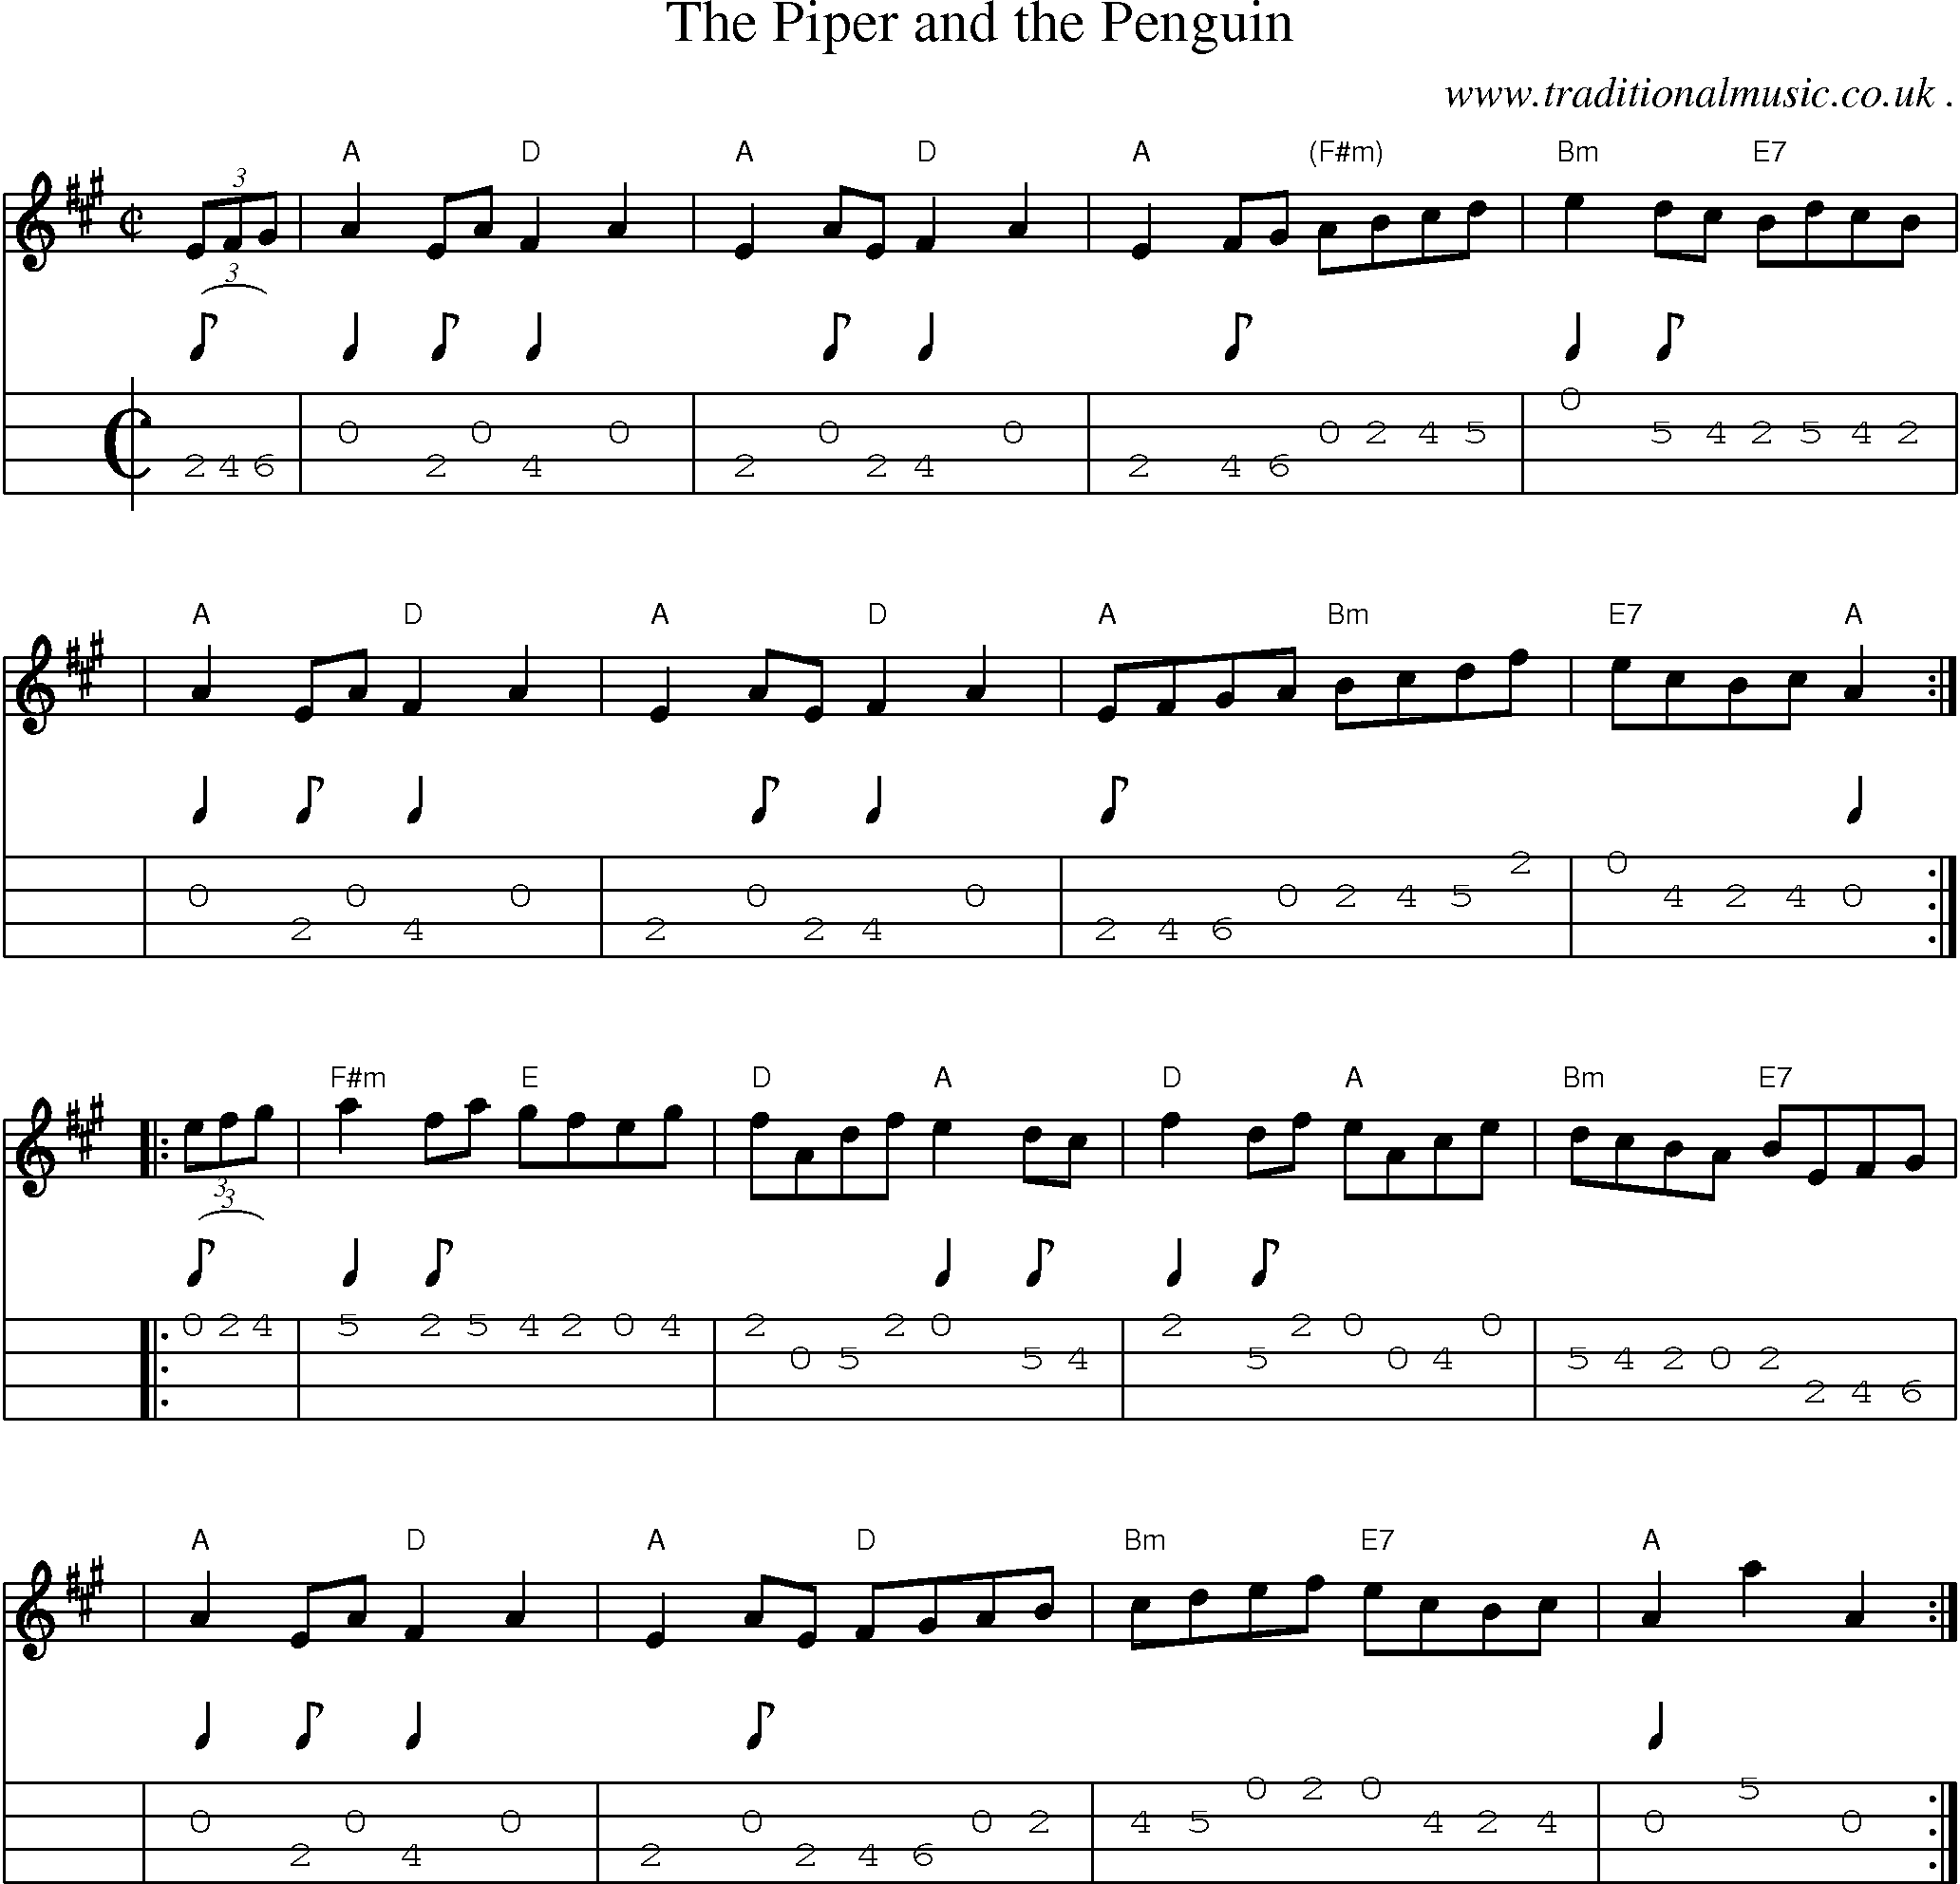 Sheet-music  score, Chords and Mandolin Tabs for The Piper And The Penguin